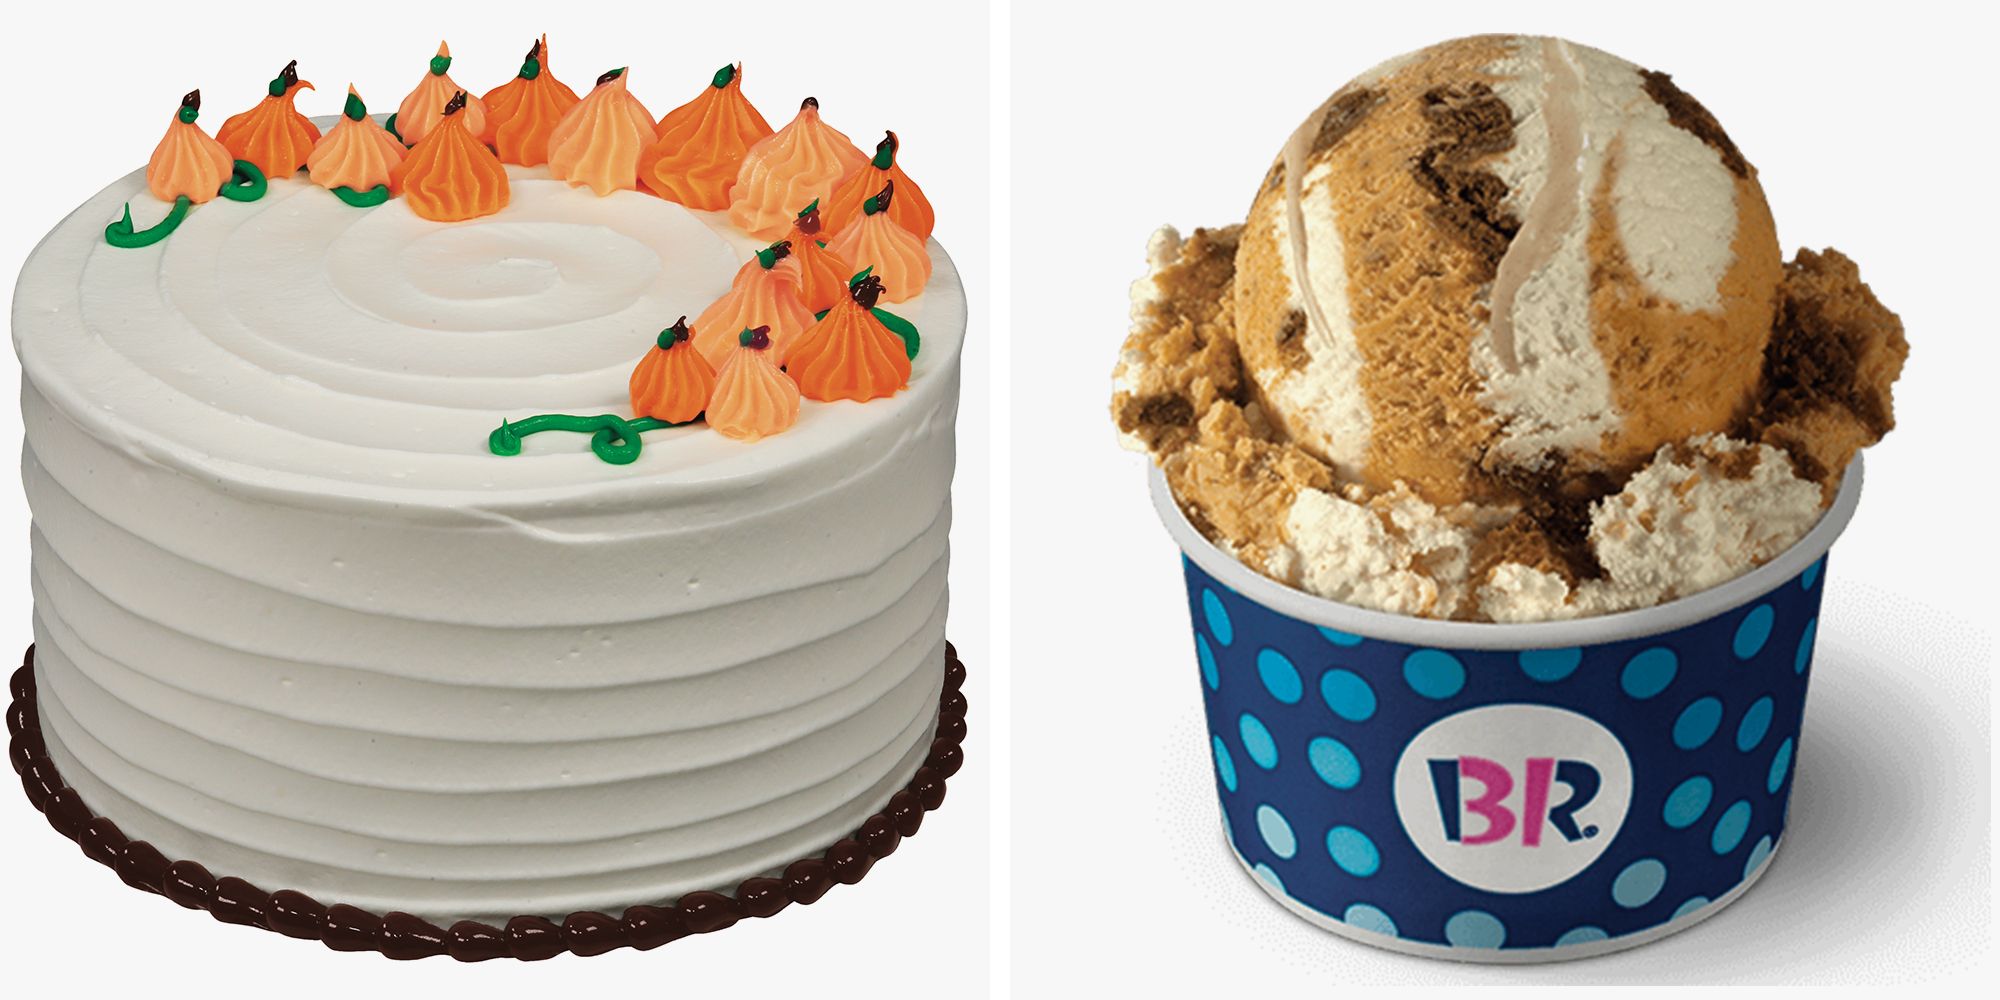 Baskin Robbins Cake Review - The Durian Bakery